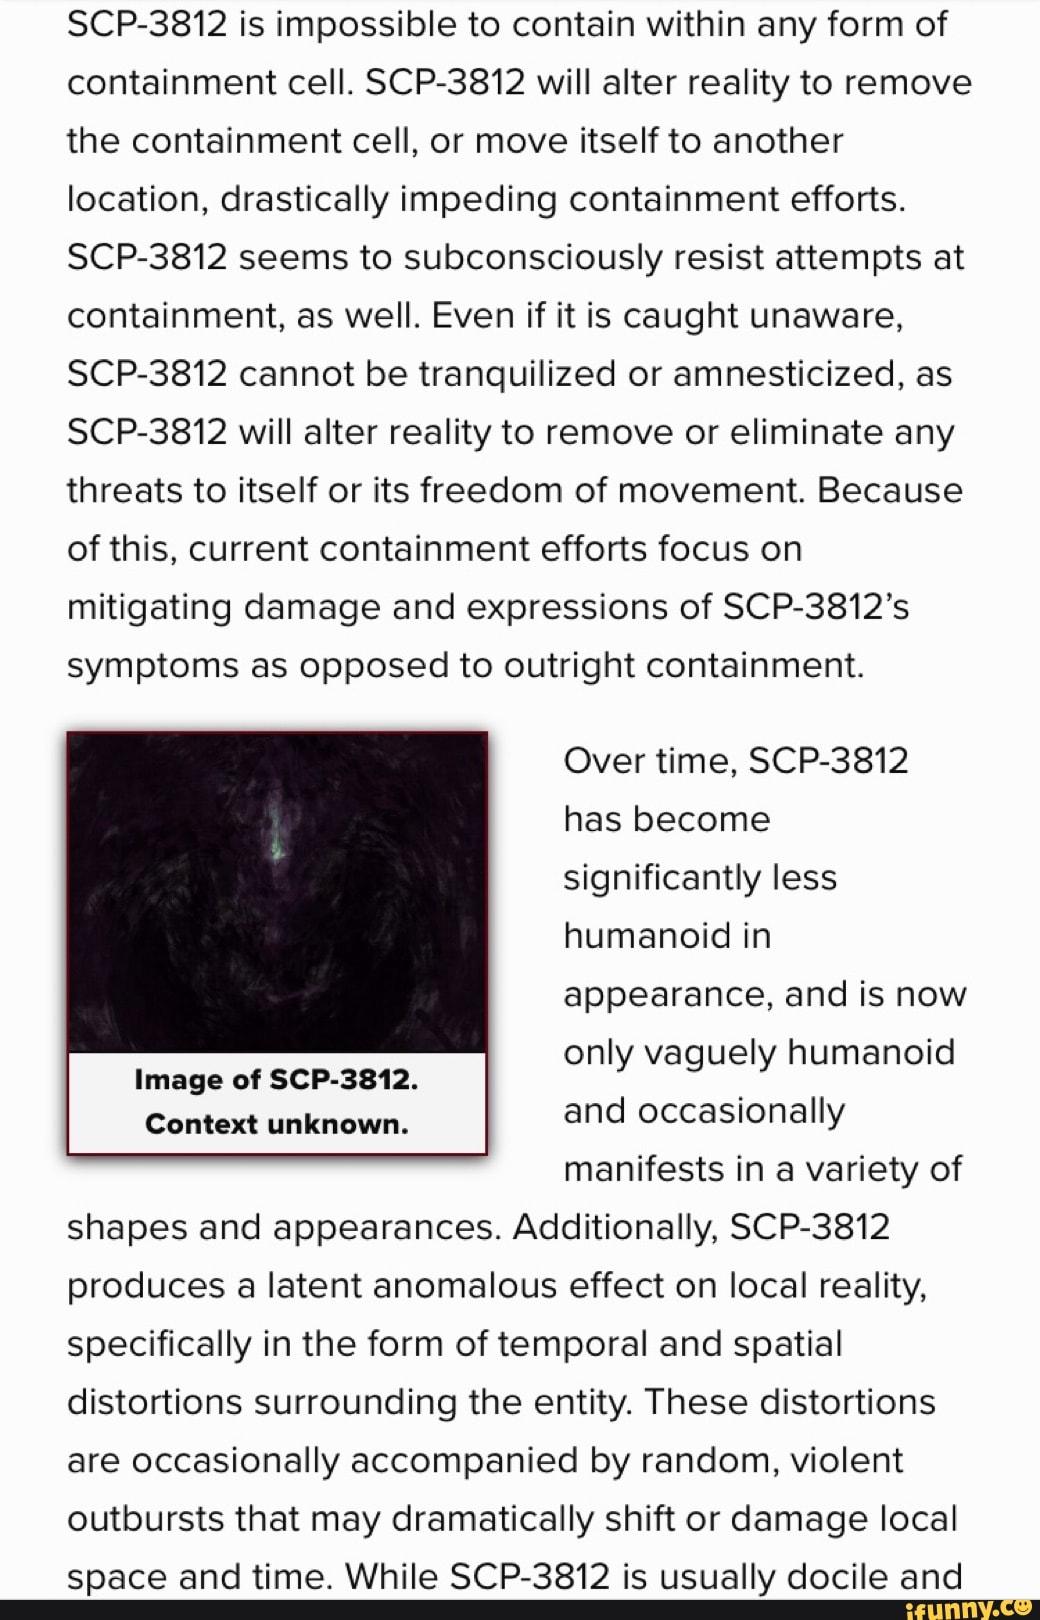 Why IS and IS NOT are scaling above SCP-3812?